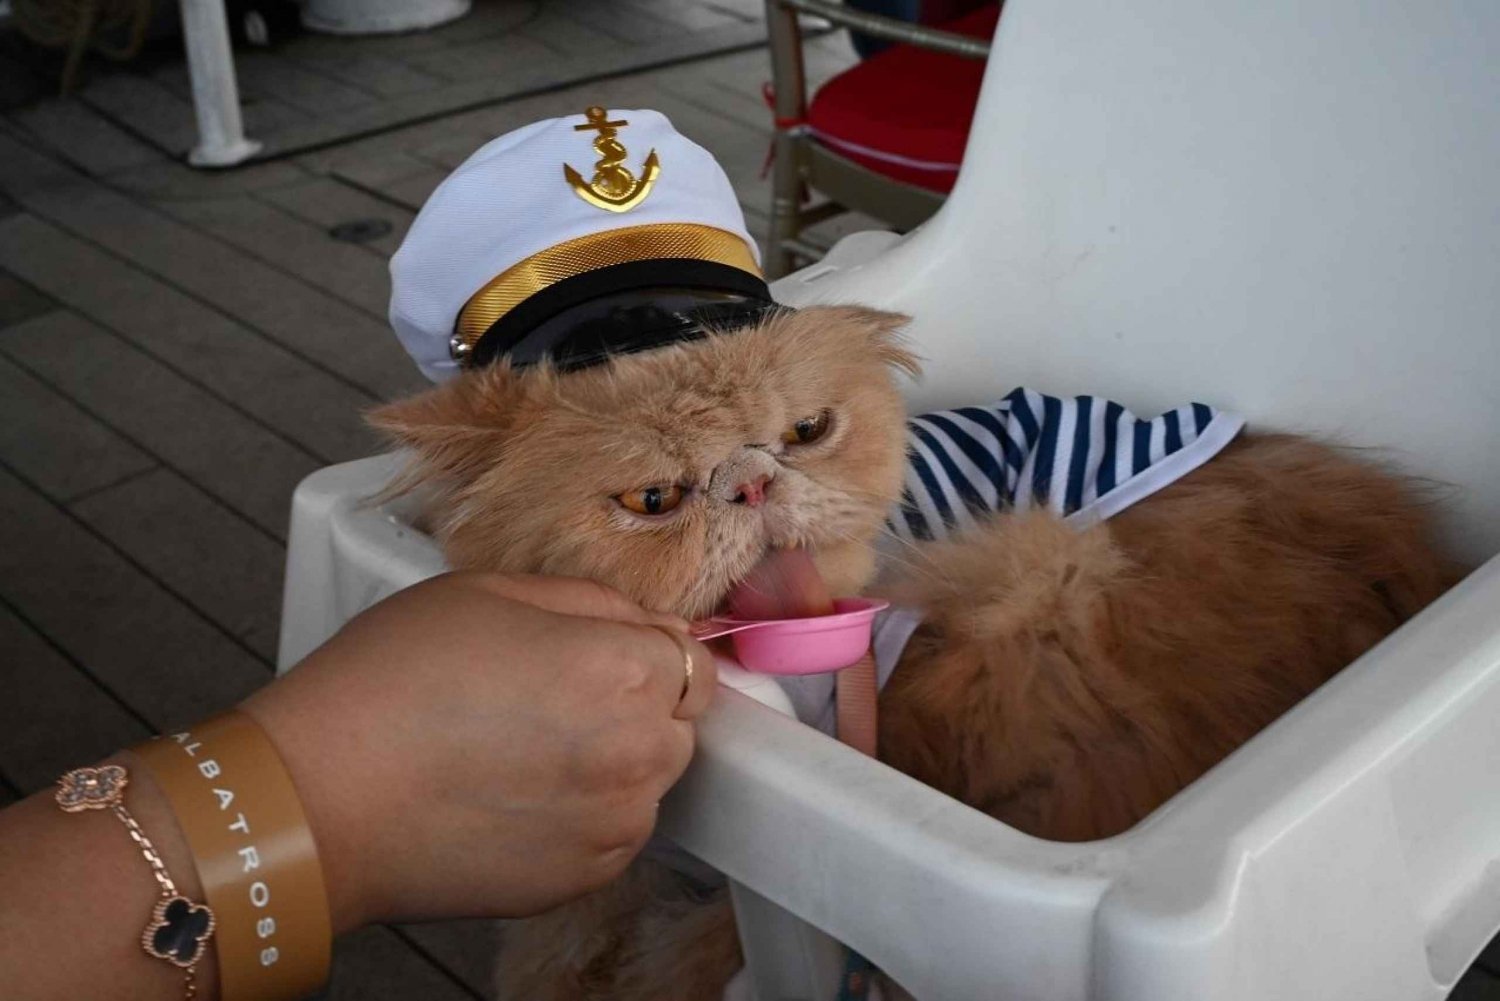 Cat Cruise onboard a Tall Ship with 4 Course Meal